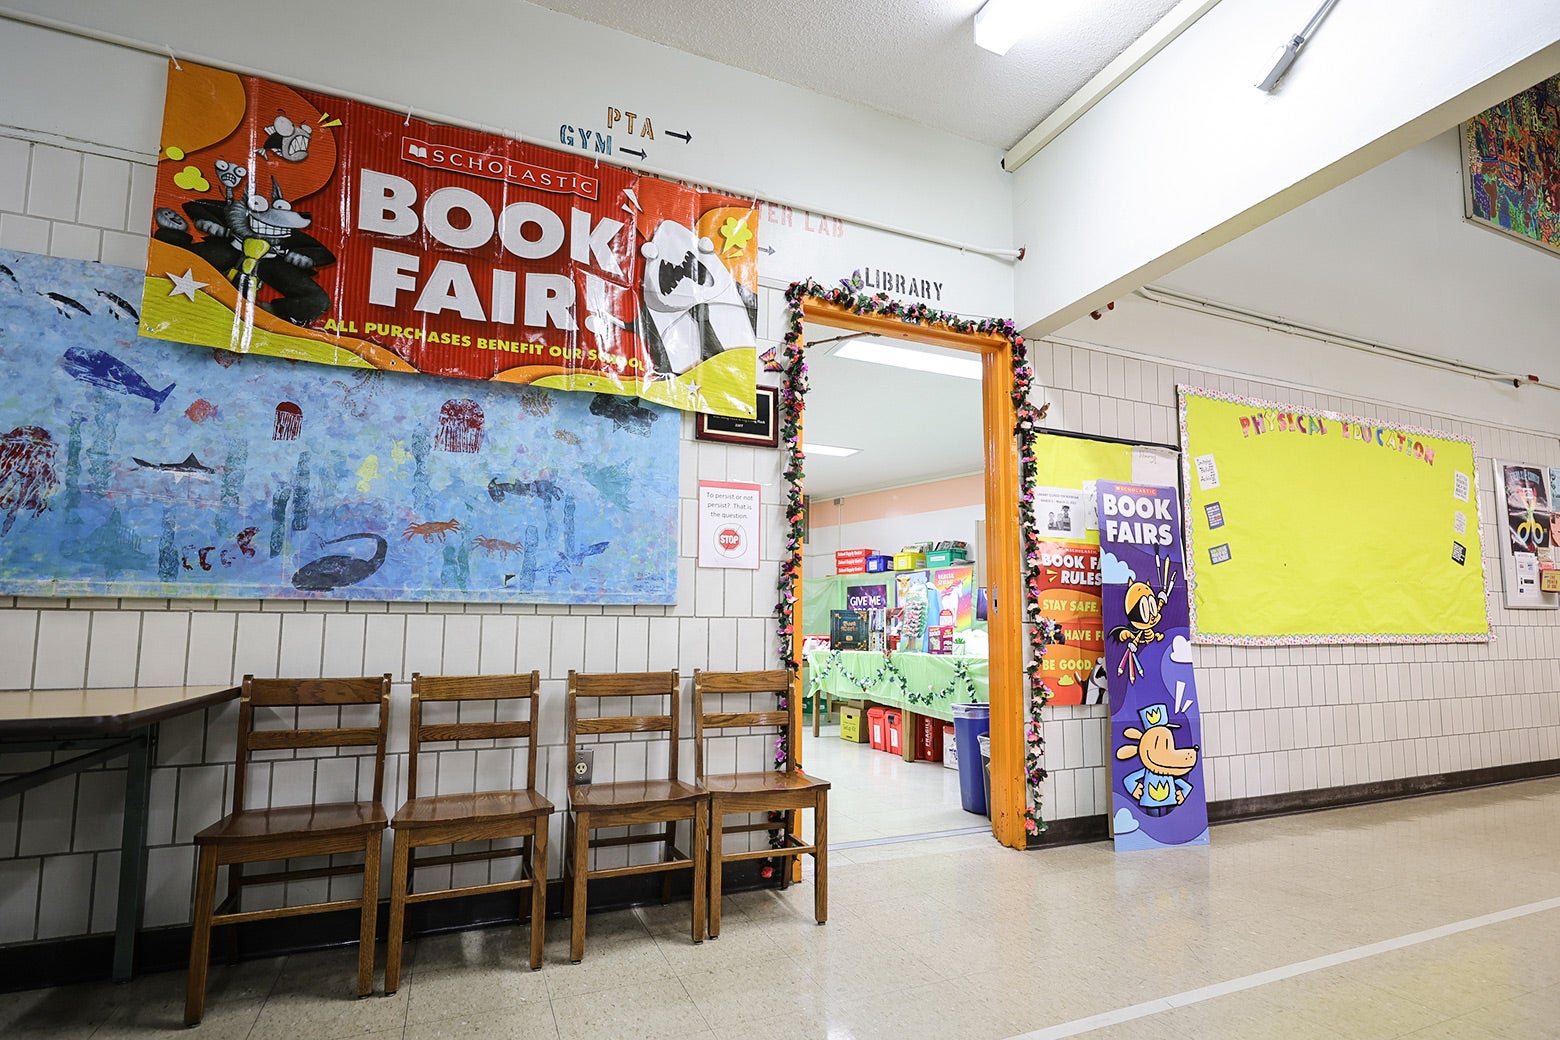 Scholastic book fairs facing controversy over displaying diverse books